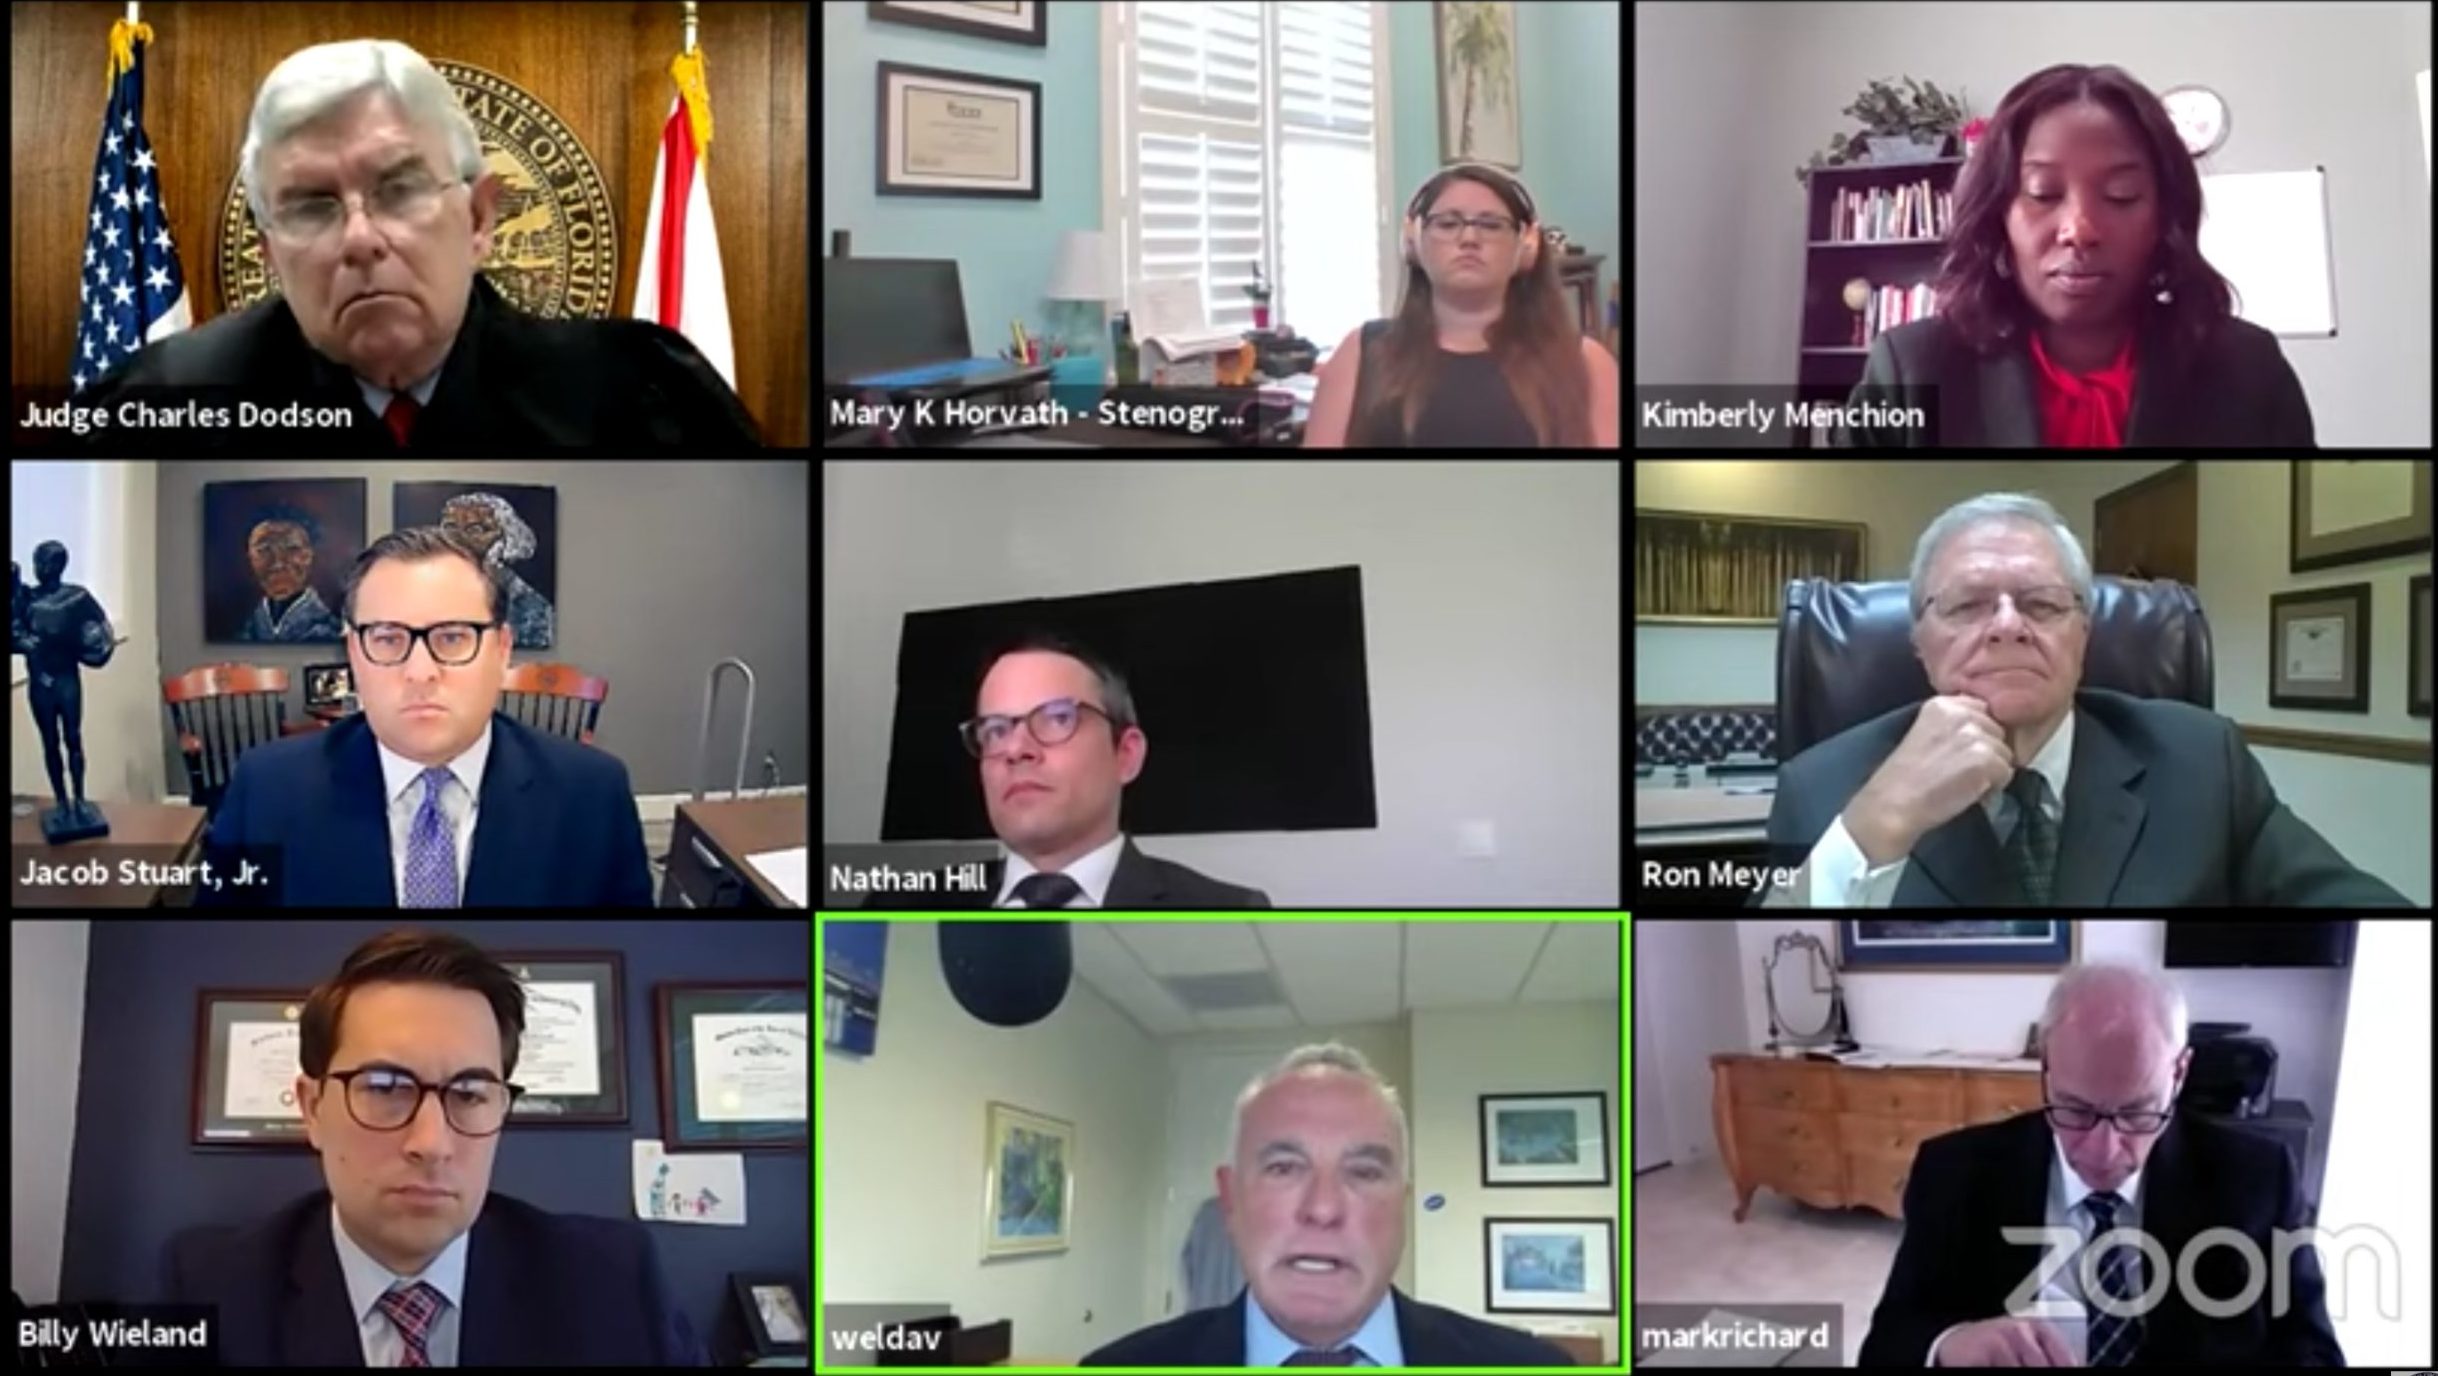 Judge Charles Dodson of the 2nd Judicial Circuit of Florida presides over a virtual hearing in Florida Education Association v. Ron DeSantis on Friday, Aug. 21. (2nd Judicial Circuit of Florida/Video screenshot/YouTube)